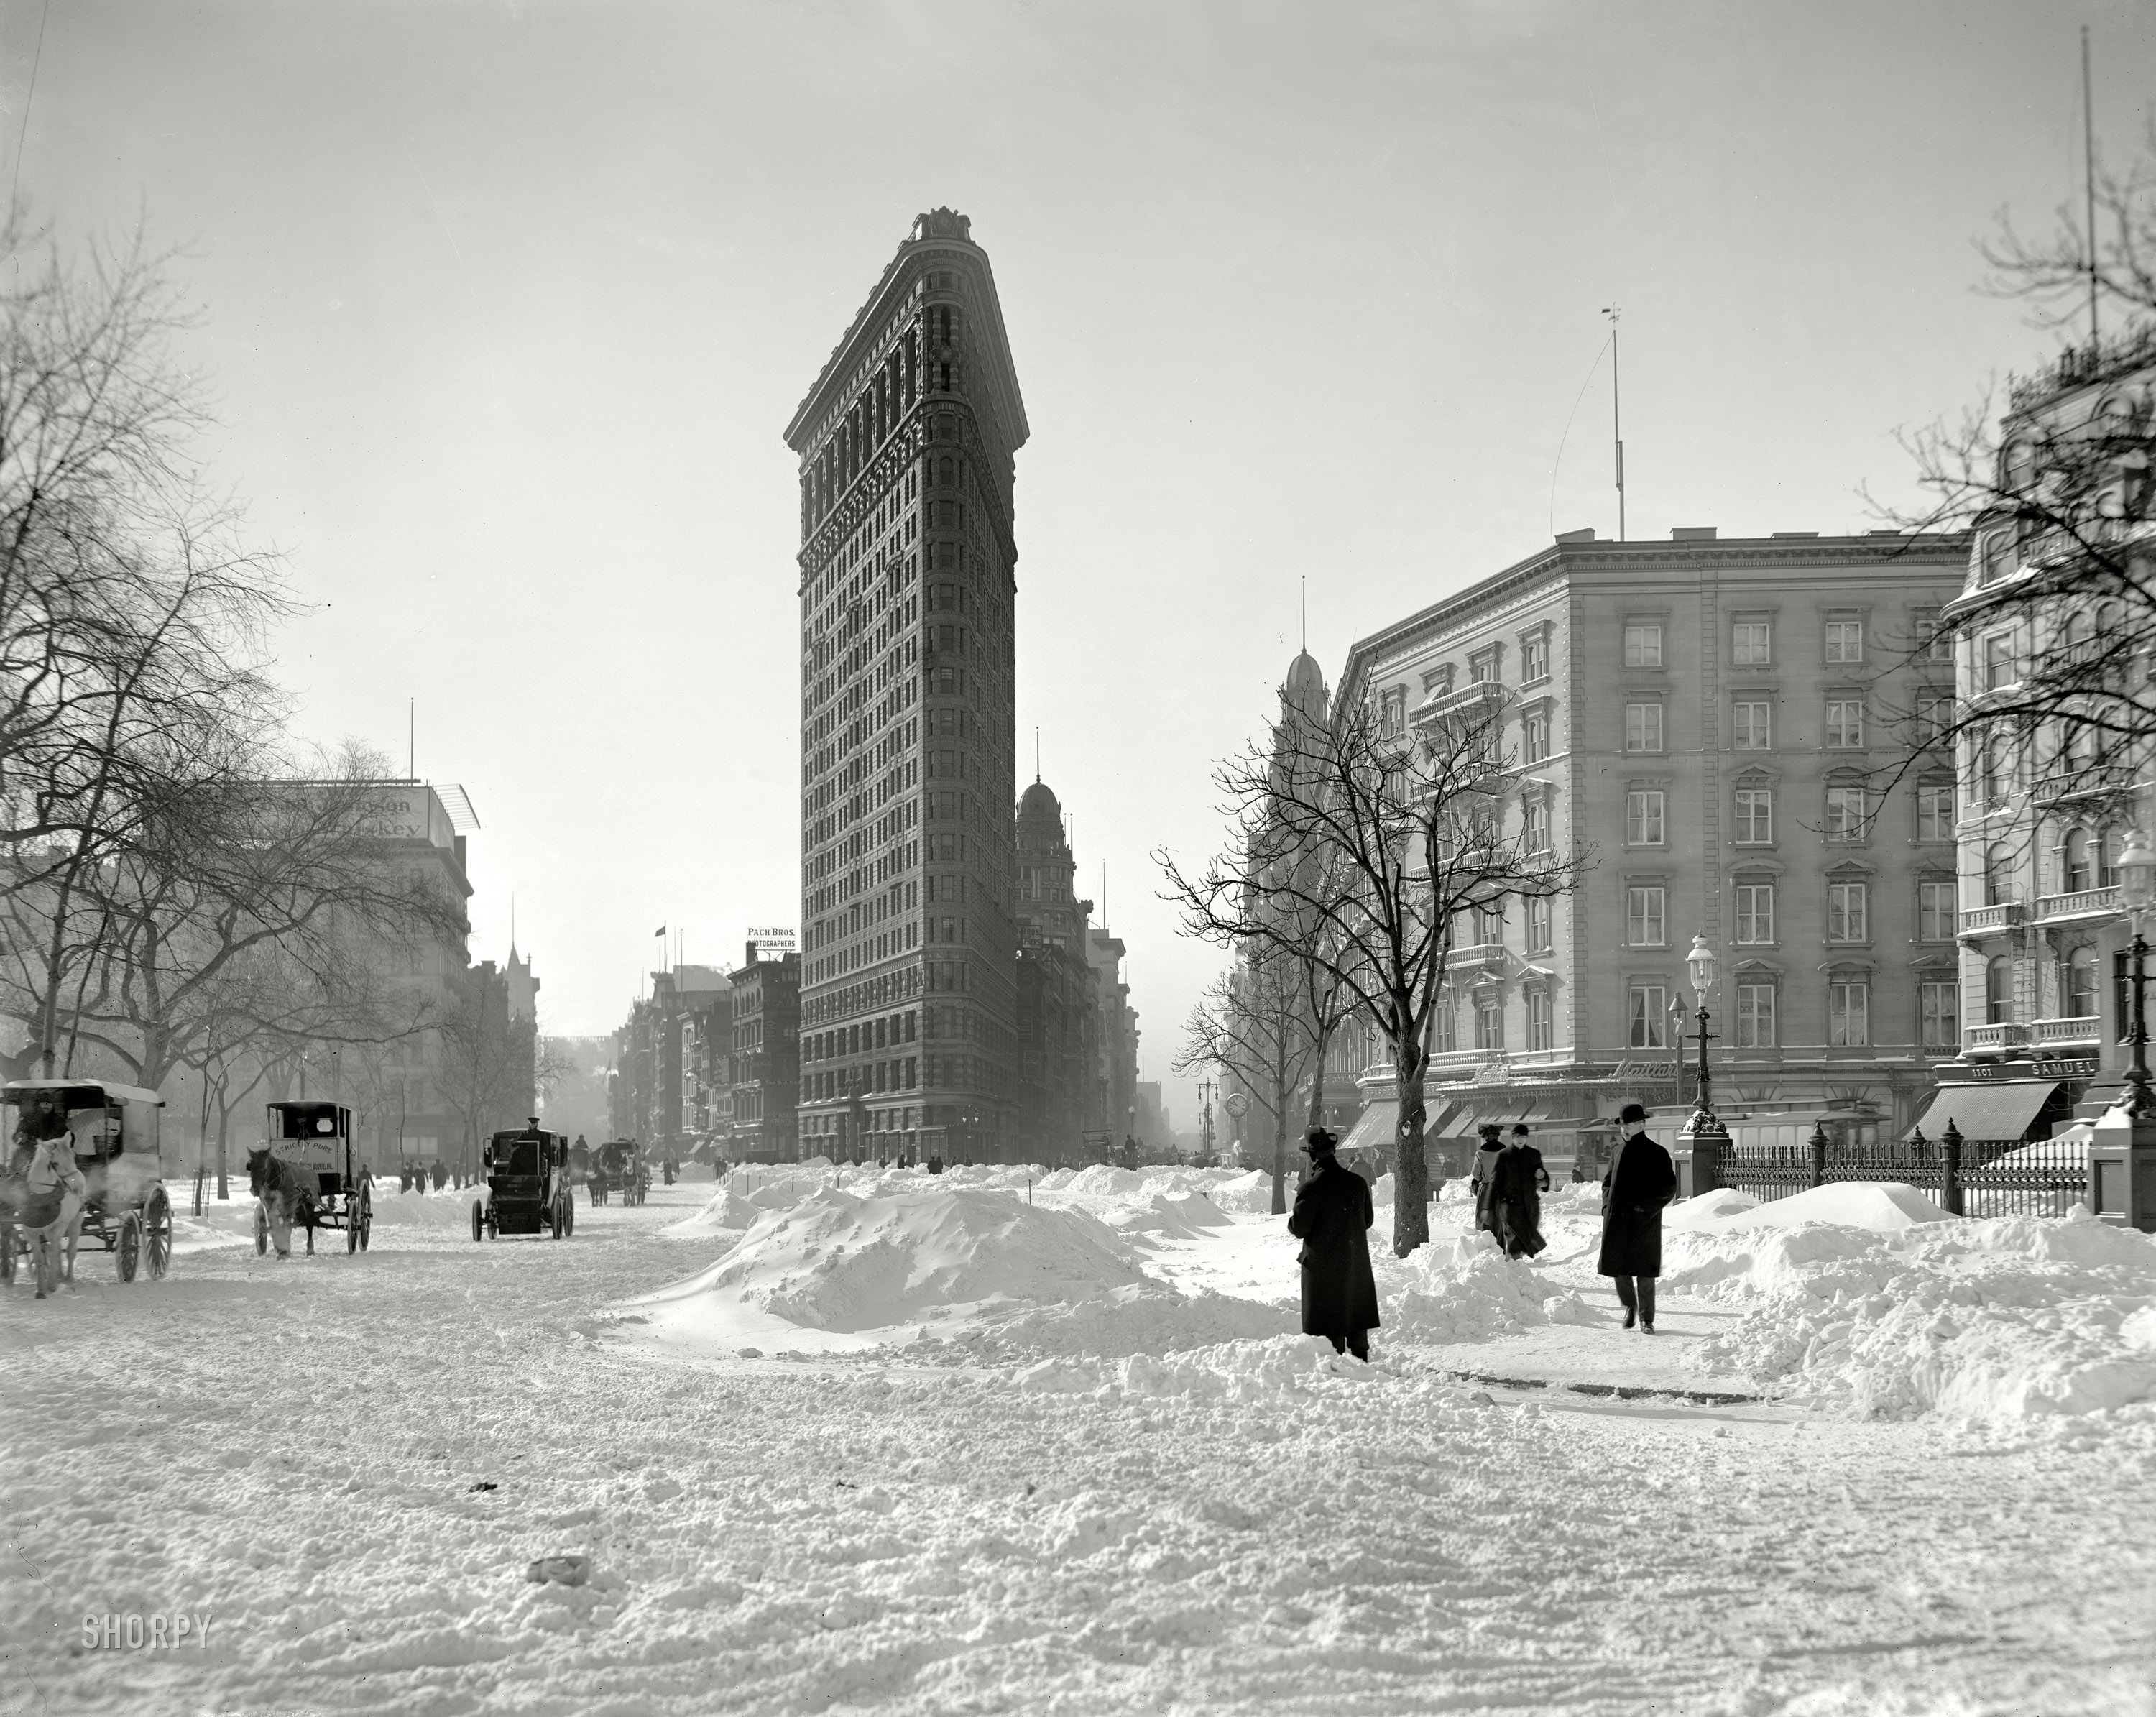 New York circa 1905. "Flatiron Building, corner after snow storm." 8x10 inch dry plate glass negative, Detroit Publishing Company. View full size.